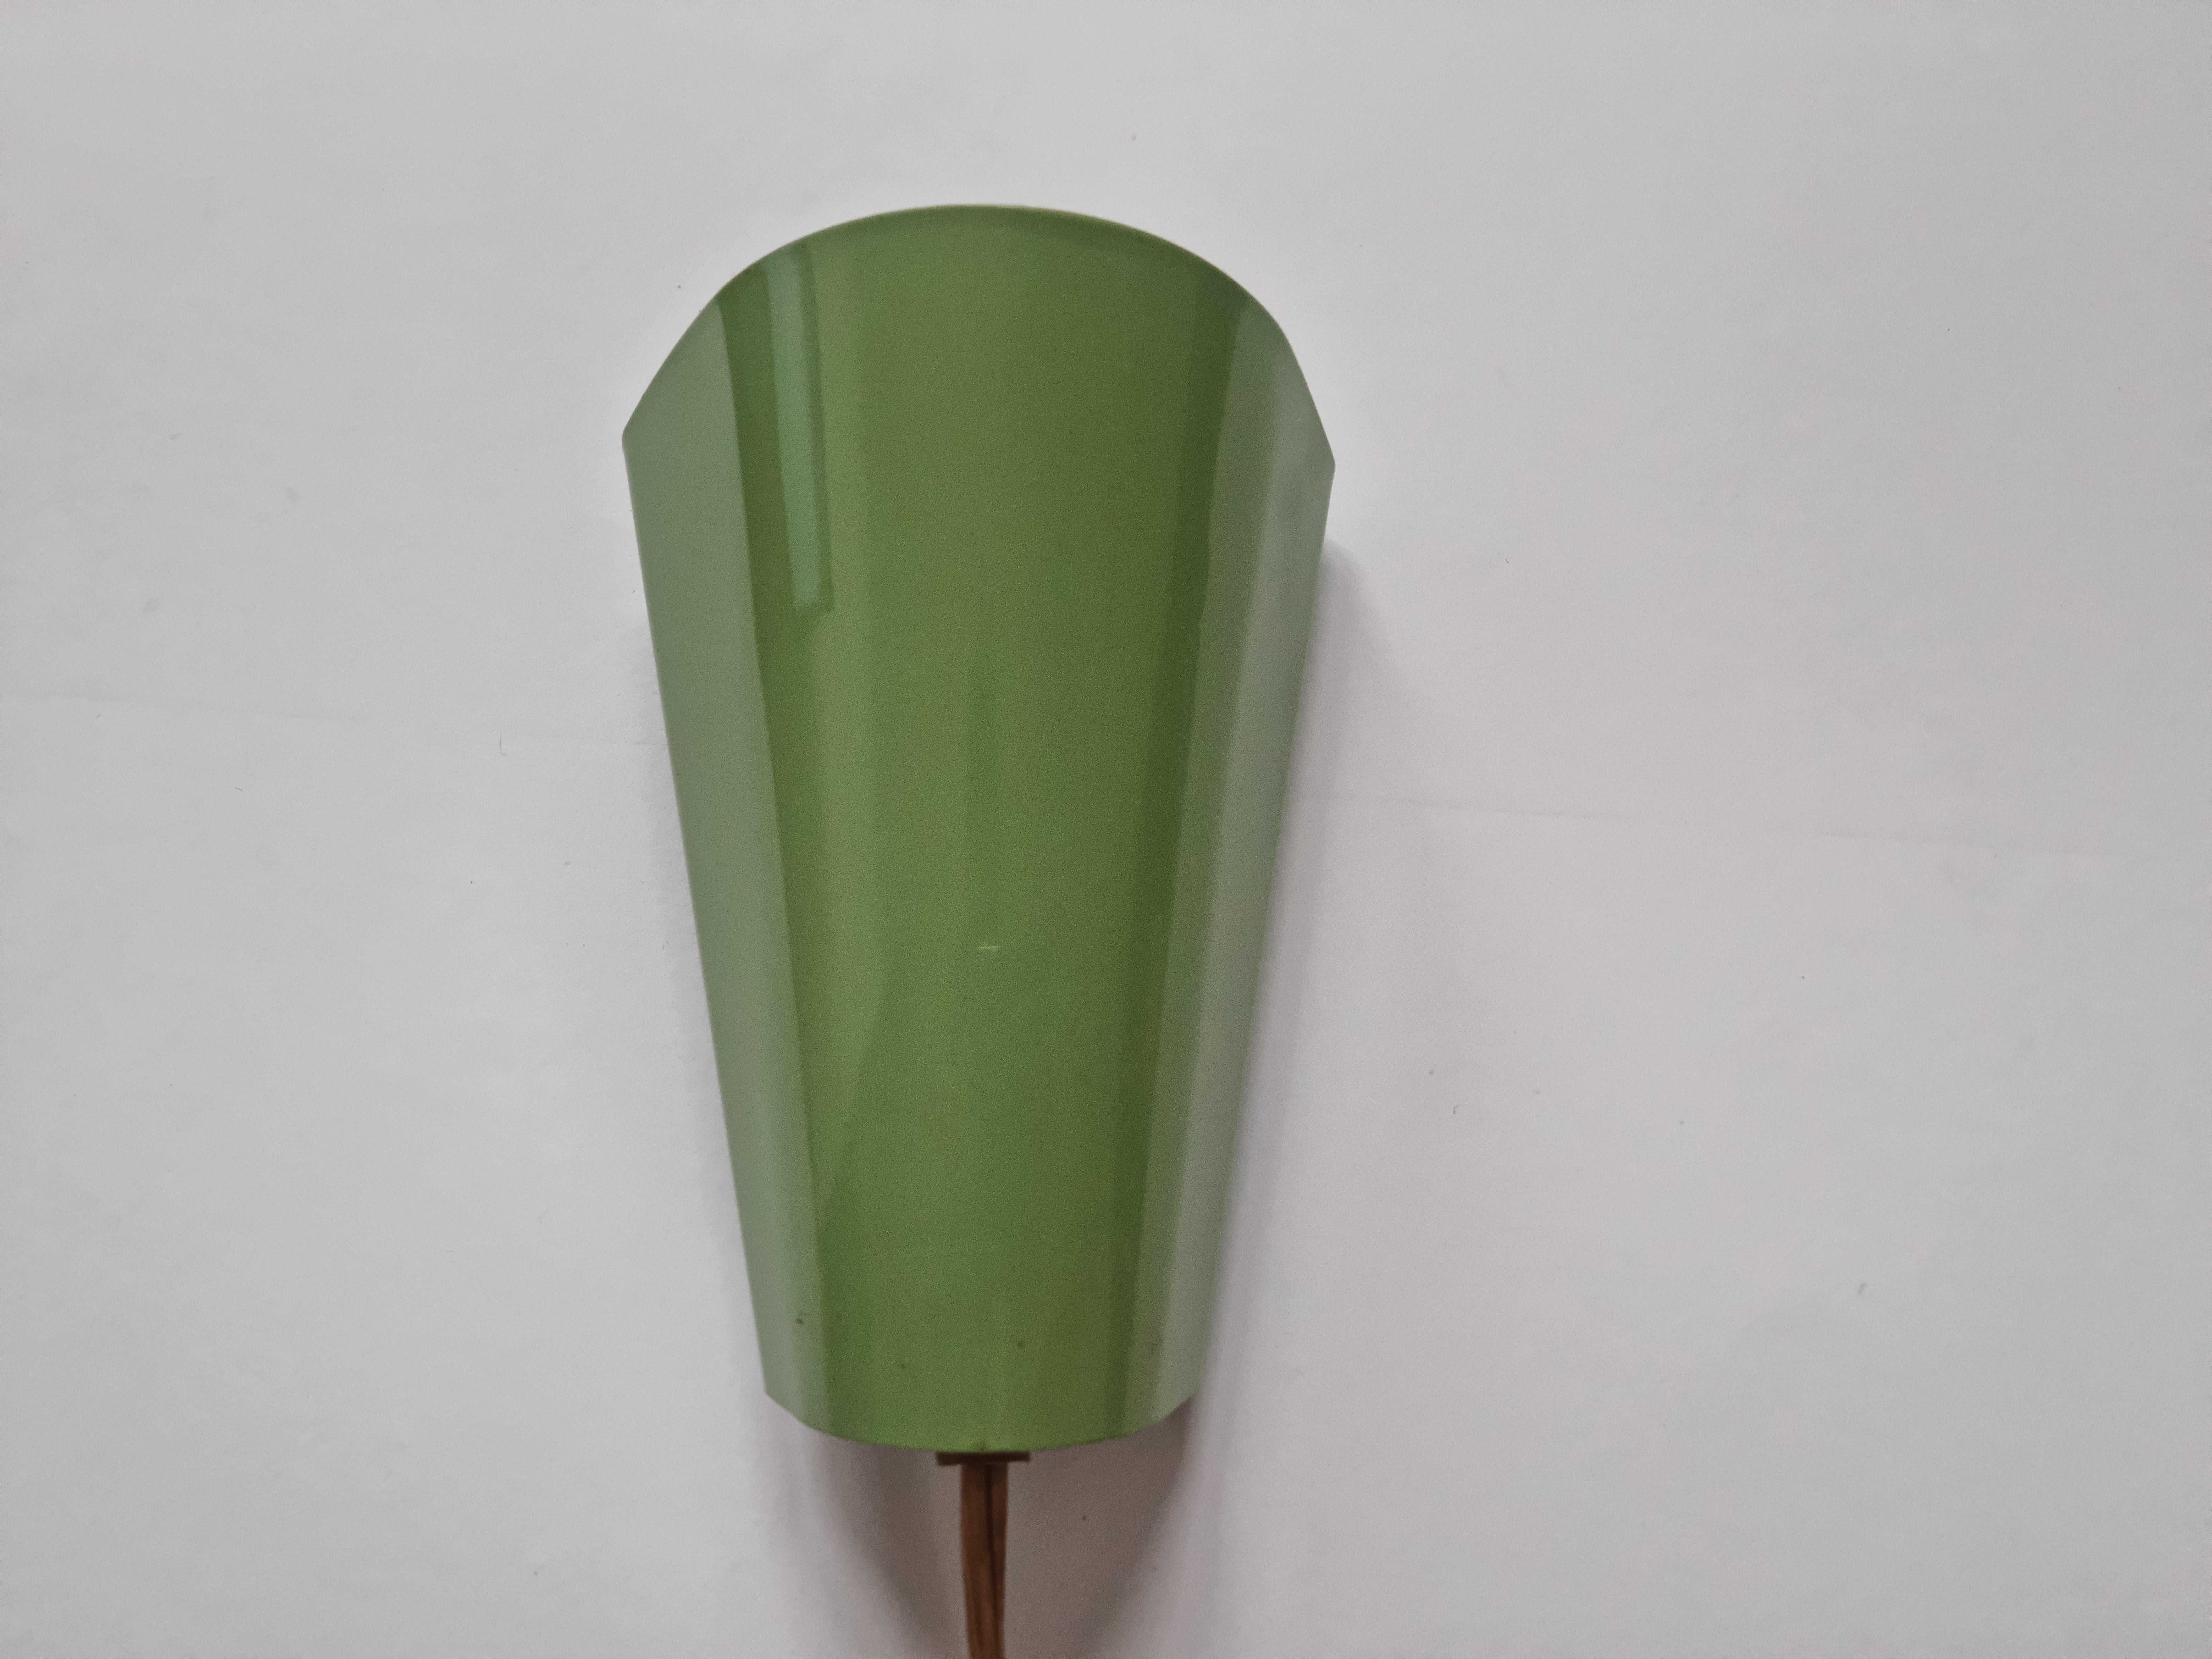 Midcentury Rare Wall Lamp Lidokov, Designed by Josef Hurka, 1960s For Sale 8